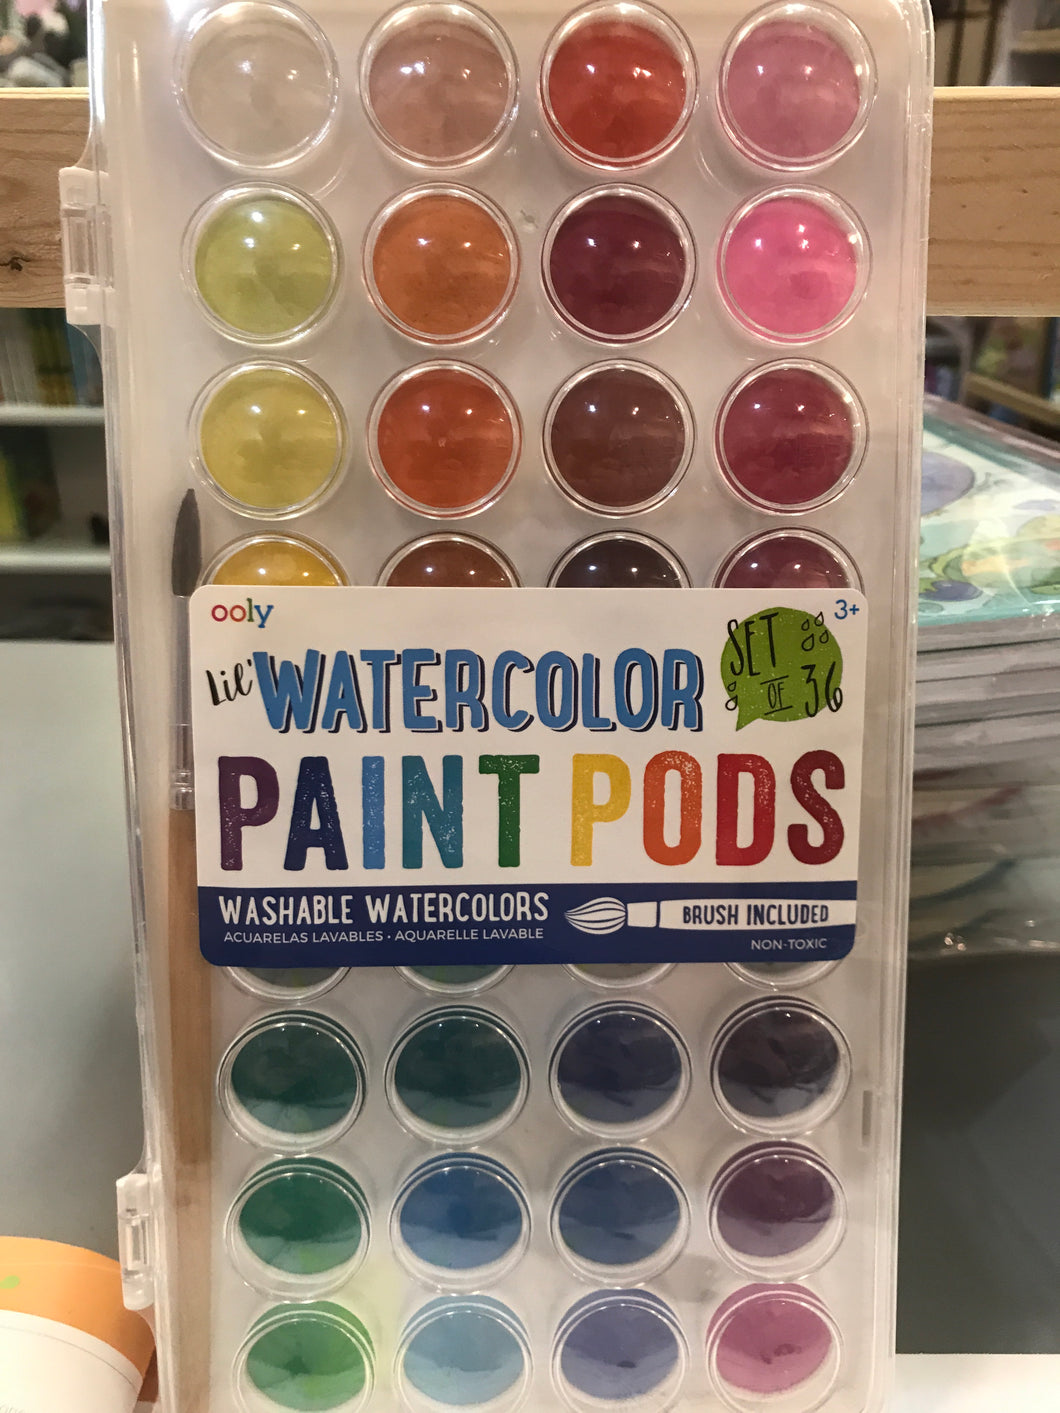 ooly - Lil’ Watercolor Paint Pods Set of 36